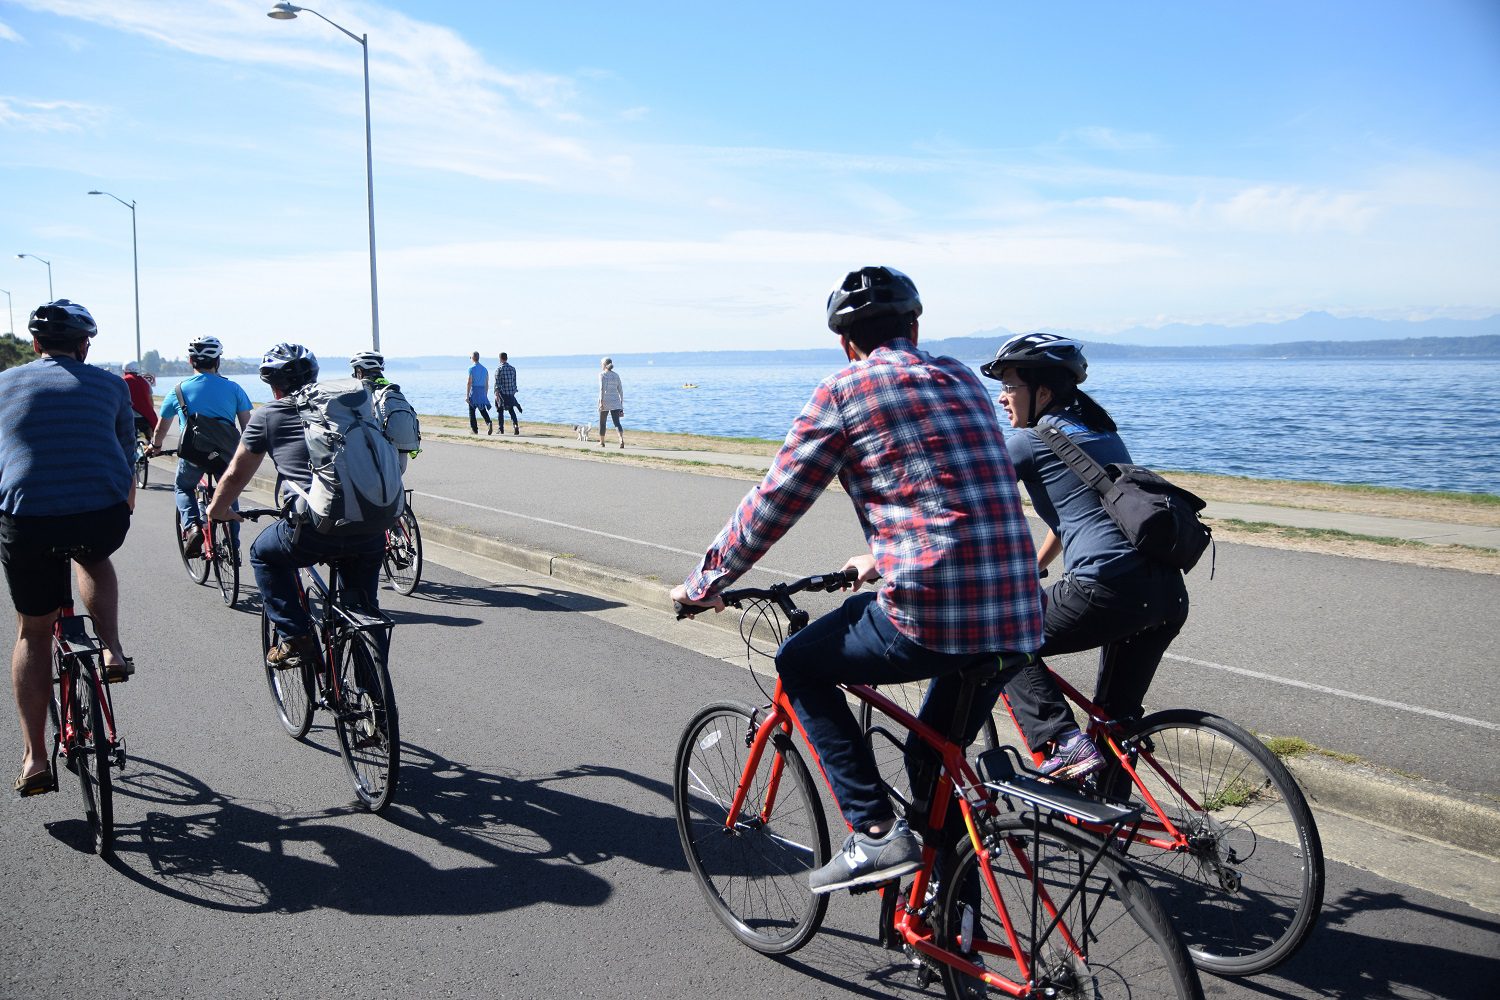 Several people bike in West Seattle on a sunny day. People walk in the background, near the water.